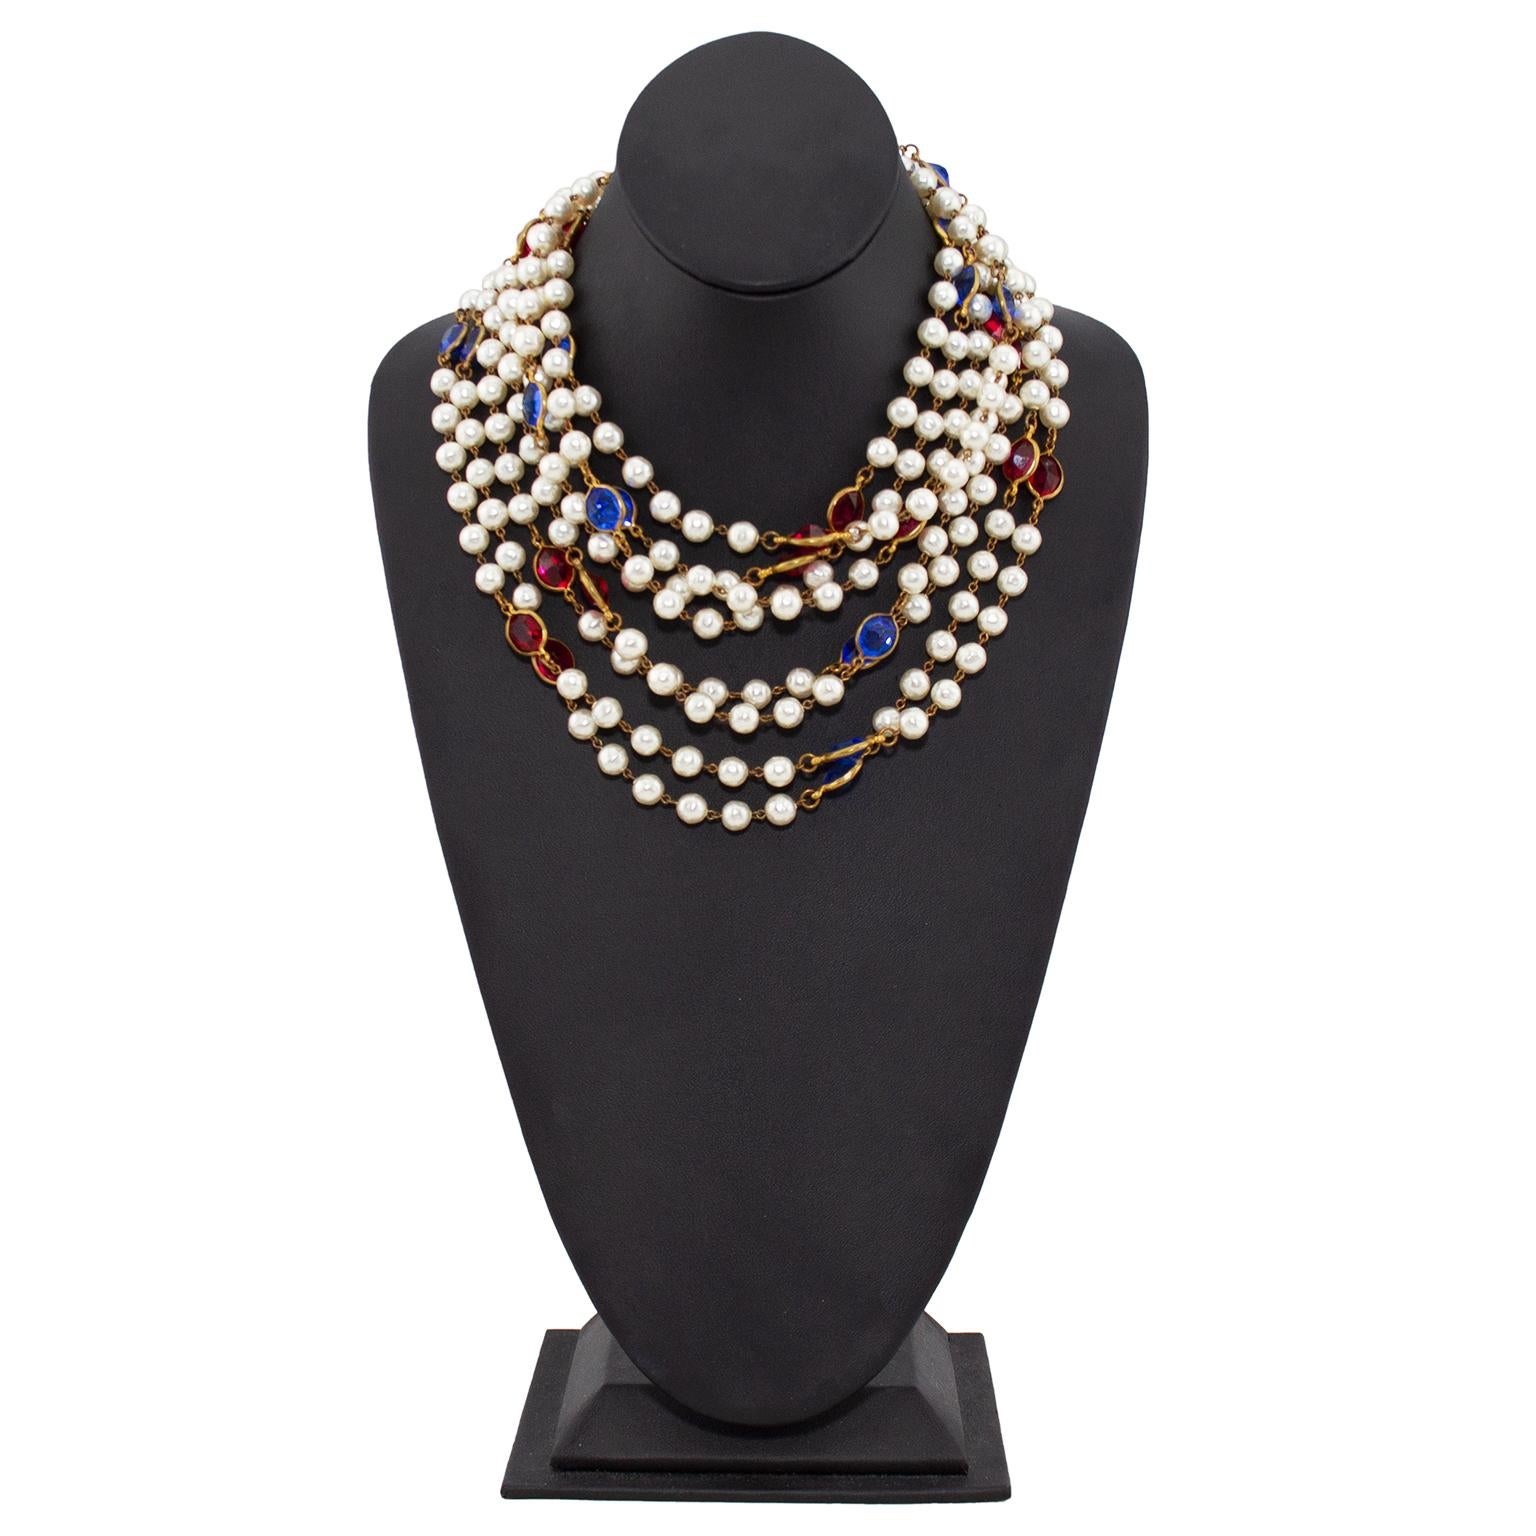 Incredible and show stopping Chanel Haute Couture sautoir featuring faux pearls with oval shaped blue and red poured glass beads in between every six pearls. Gold tone metal chain and settings. Measures a whopping 75.5